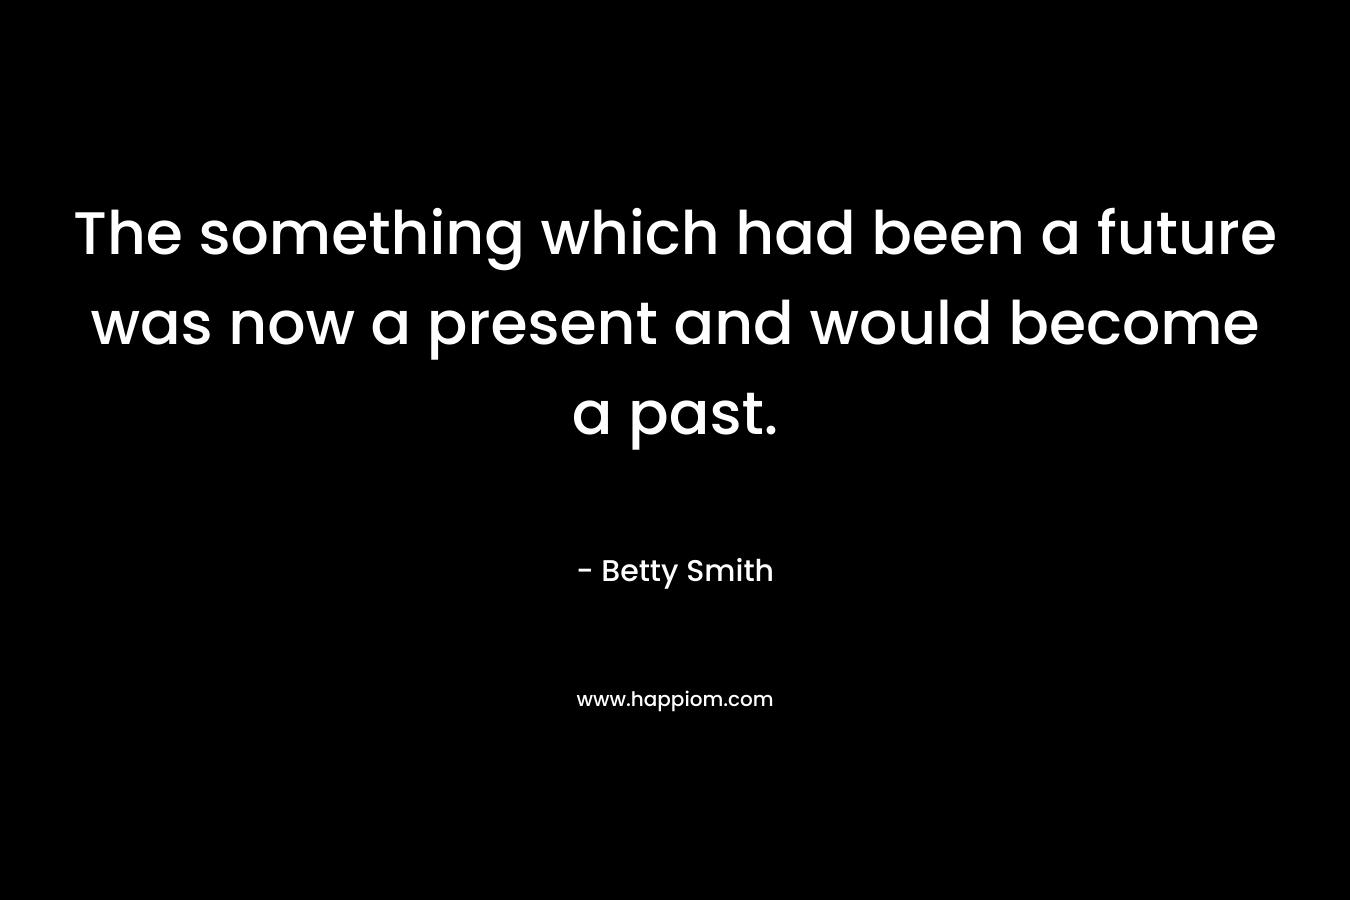 The something which had been a future was now a present and would become a past. – Betty Smith